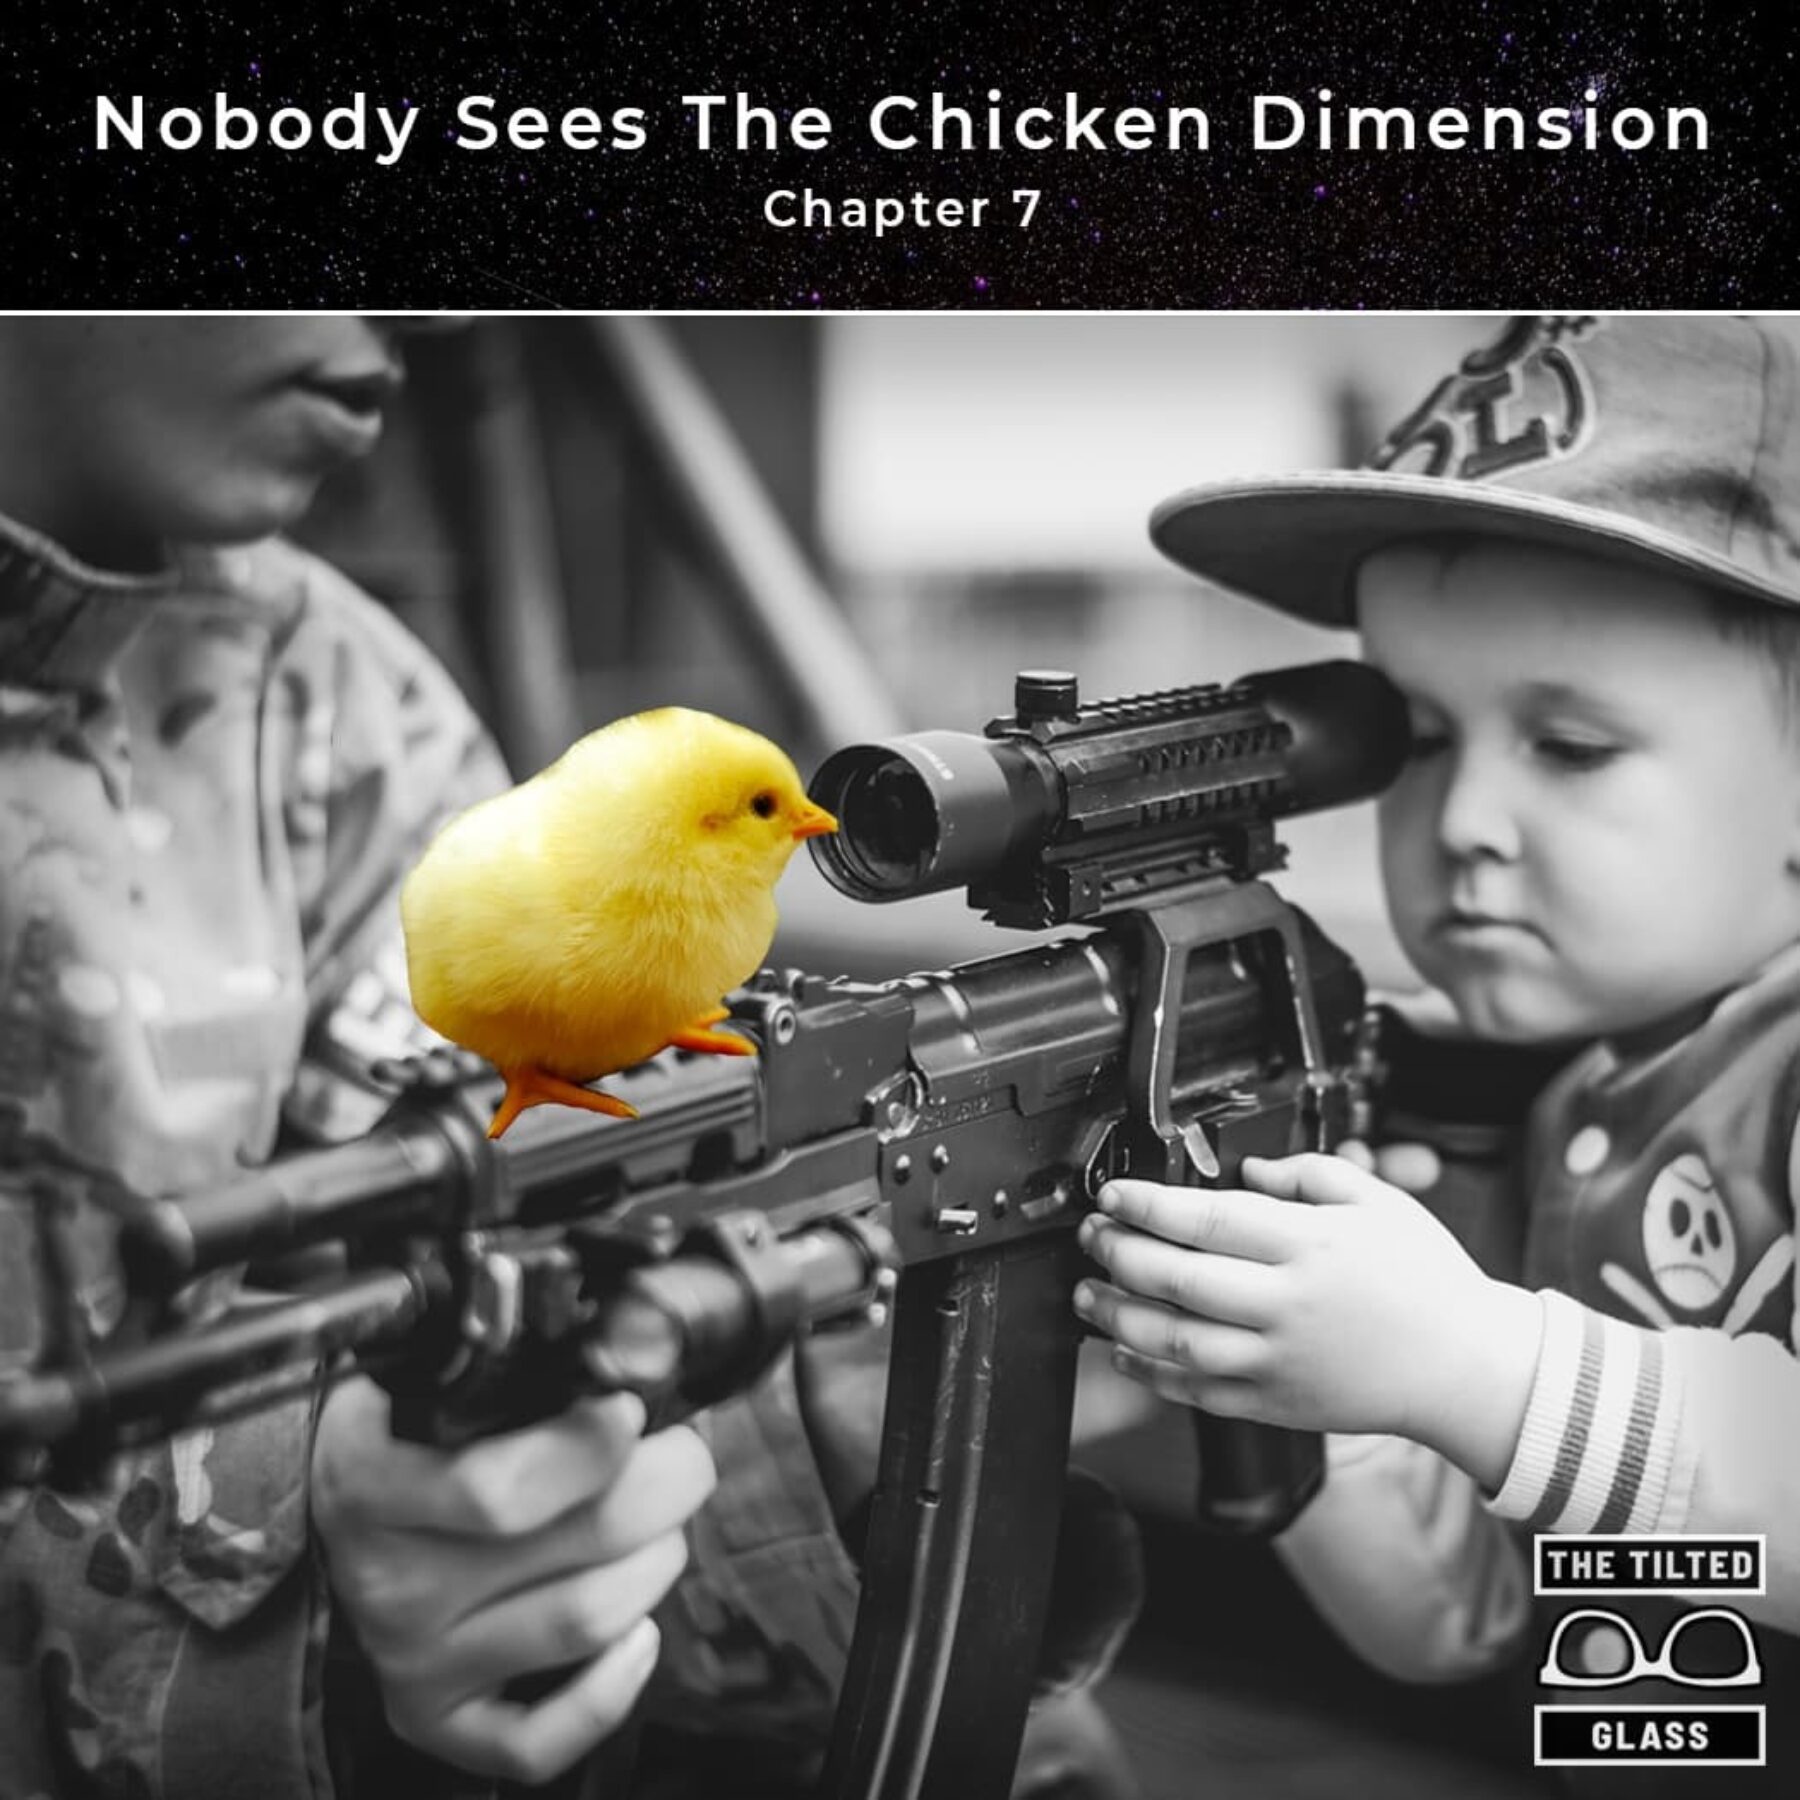 Nobody Sees The Chicken Dimension - Chapter 7 - Scope of Vision